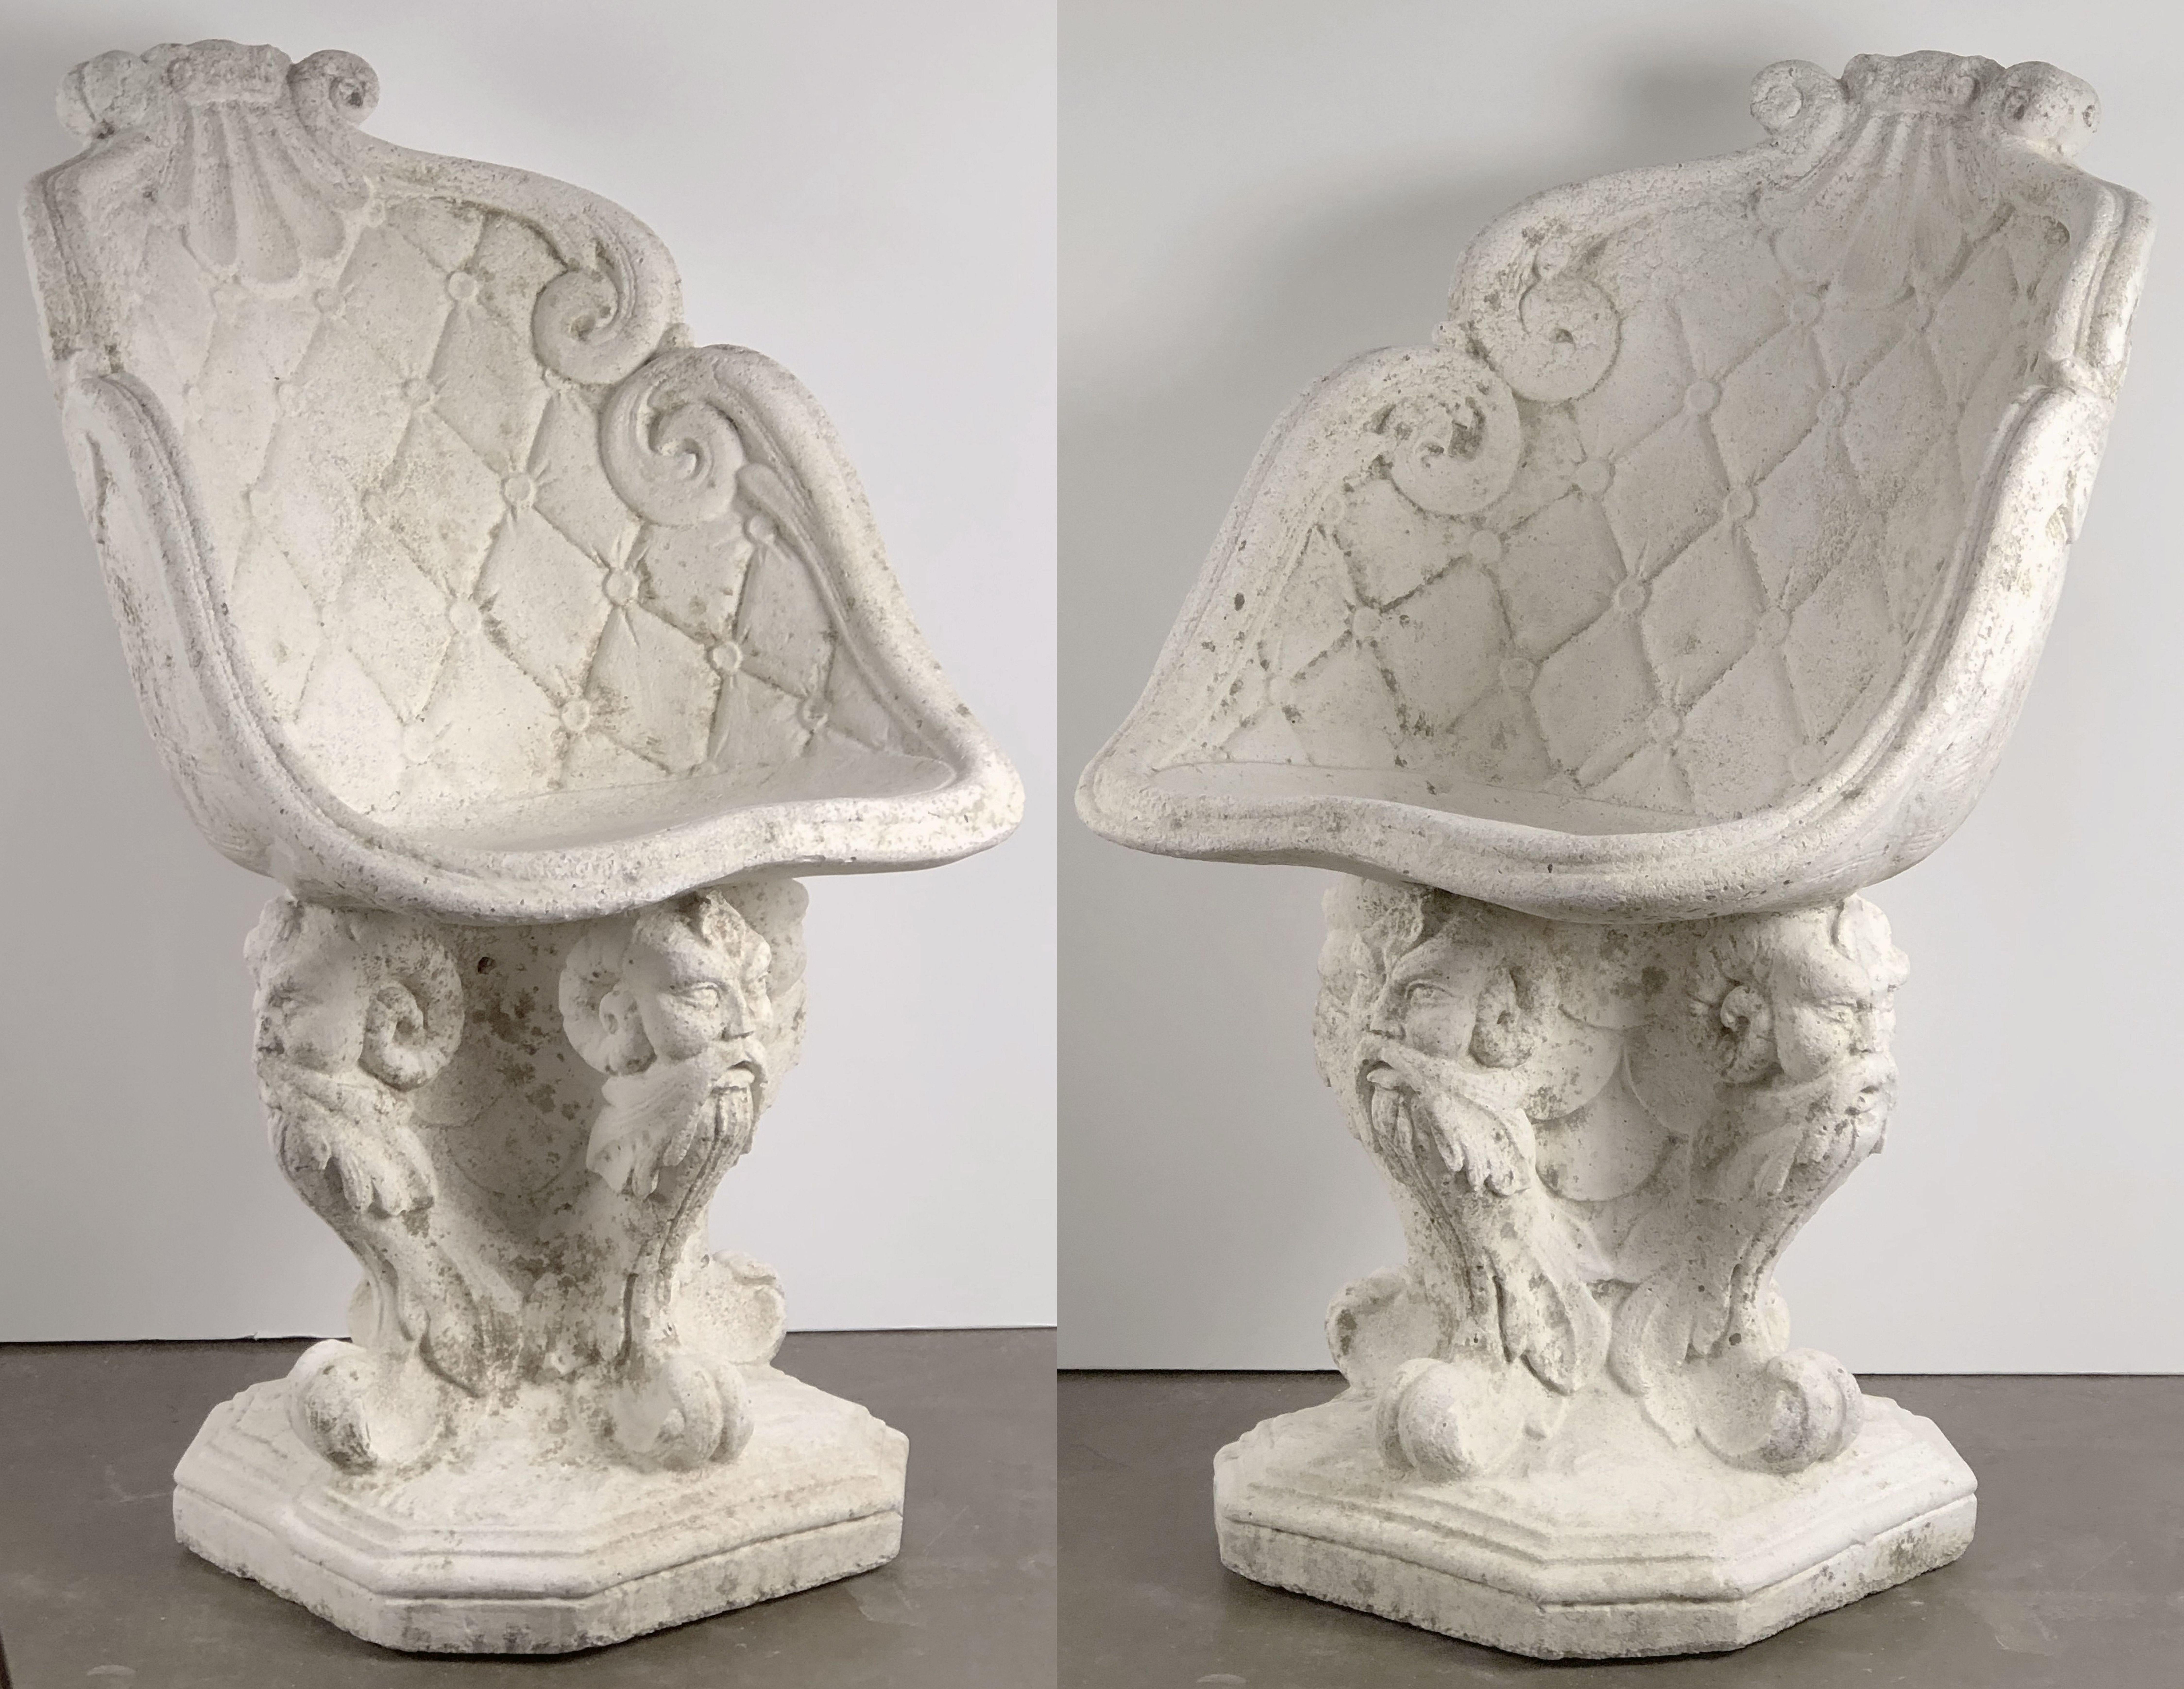 A fine pair of large Italian garden chairs of composition stone, each chair featuring a back and seat with a shell and scroll design, over a pedestal base with four Gothic figural heads.

Dimensions are H 34 3/4 inches x W 20 1/2 inches x D 22 1/2